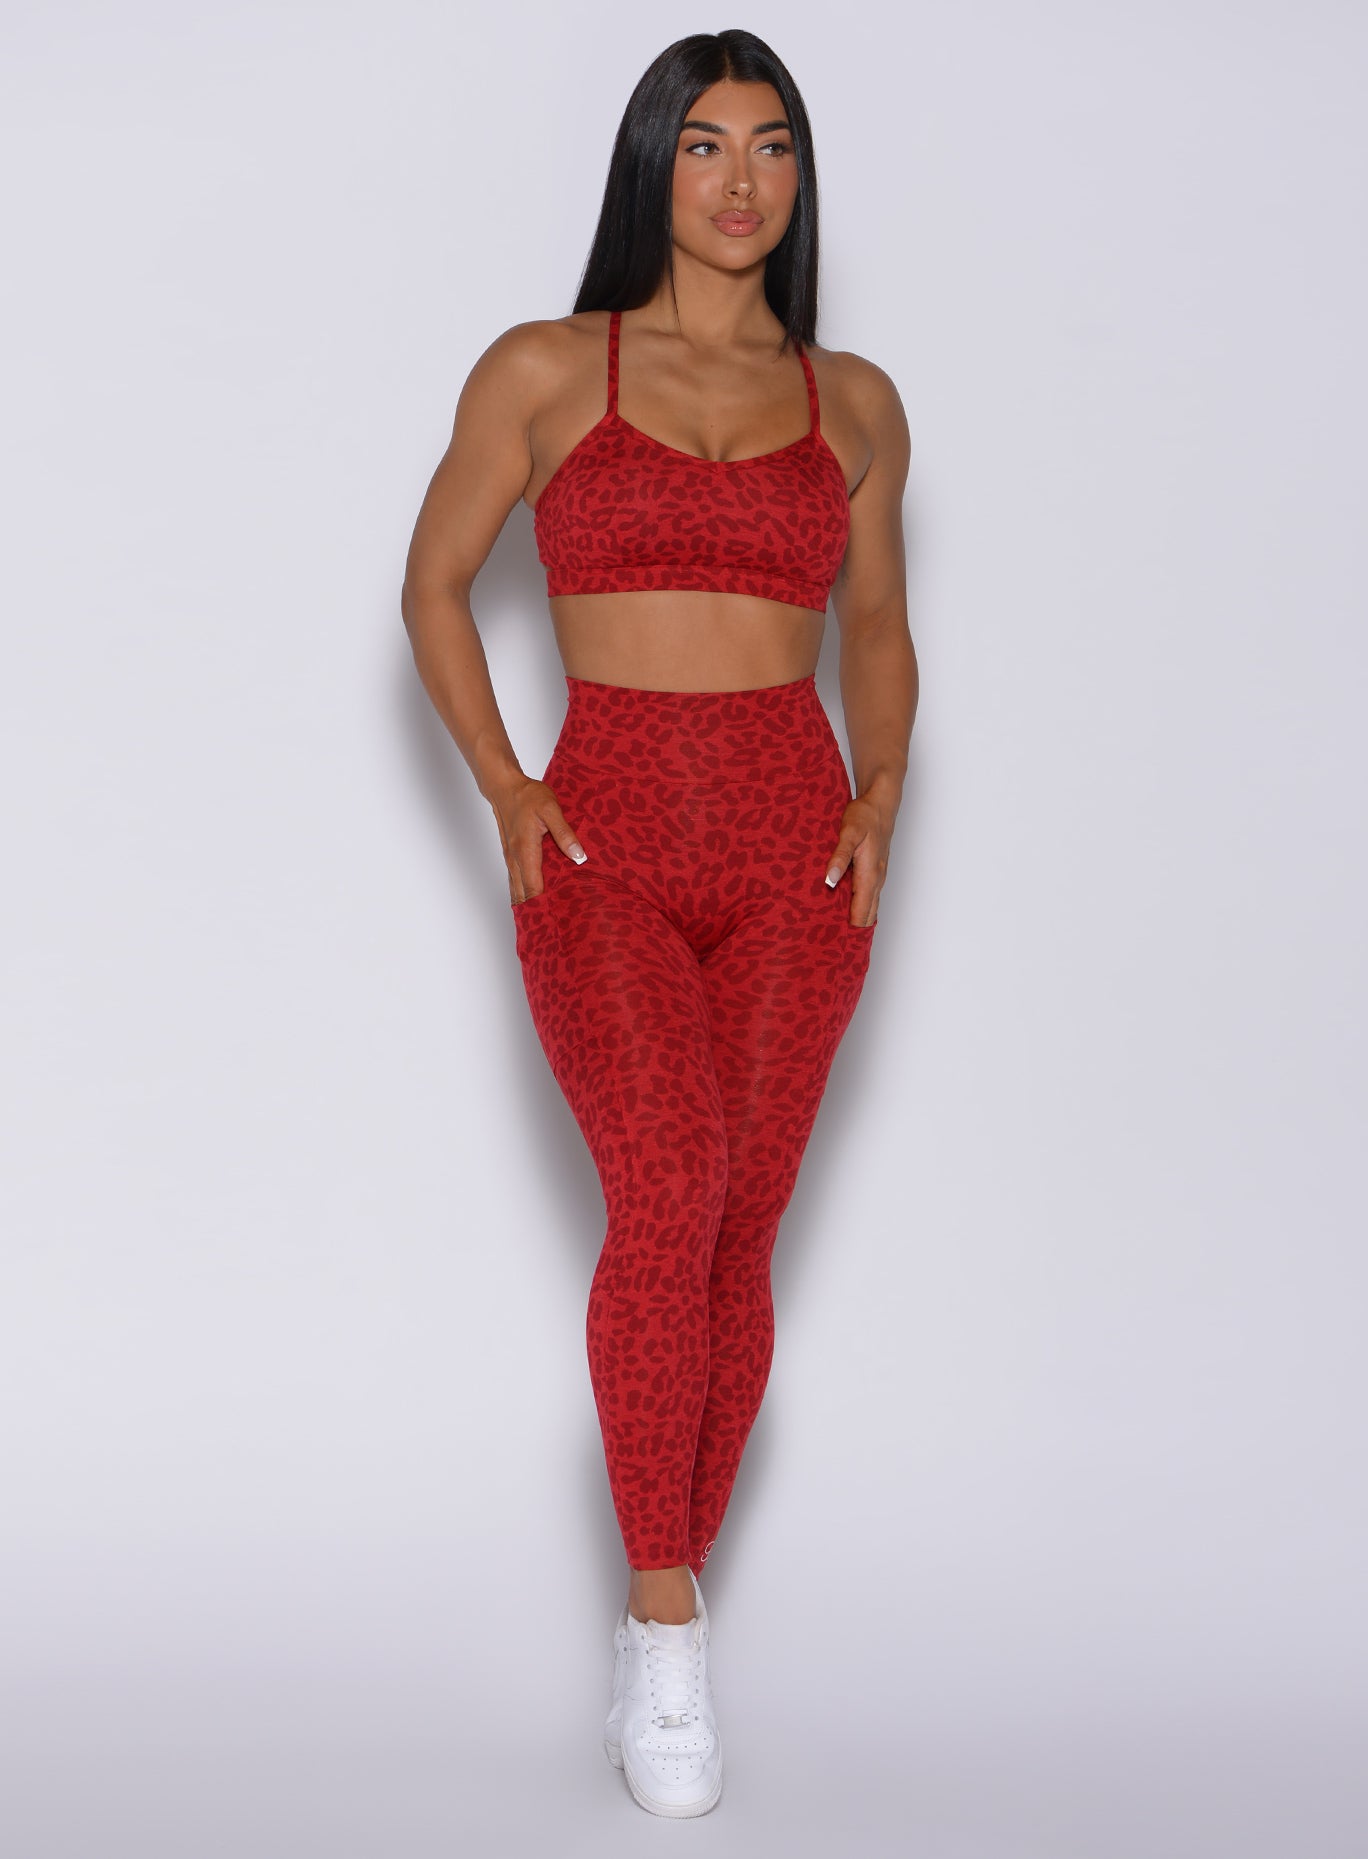 Front profile view of a model wearing our curves leggings in red cheetah color and a matching bombshell sports bra